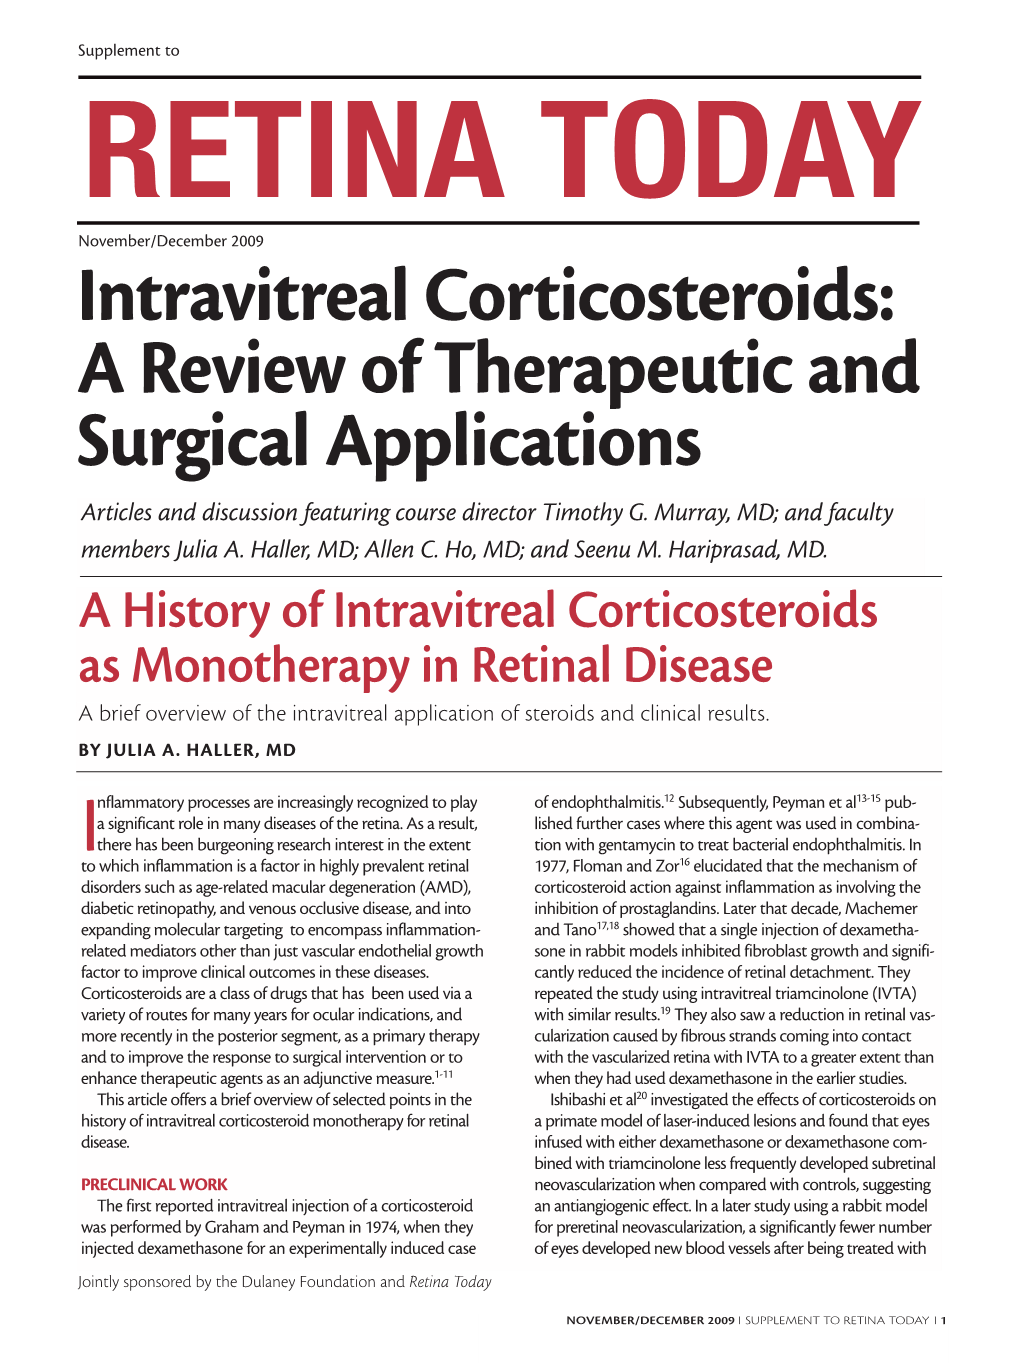 Intravitreal Corticosteroids: a Review of Therapeutic and Surgical Applications Articles and Discussion Featuring Course Director Timothy G